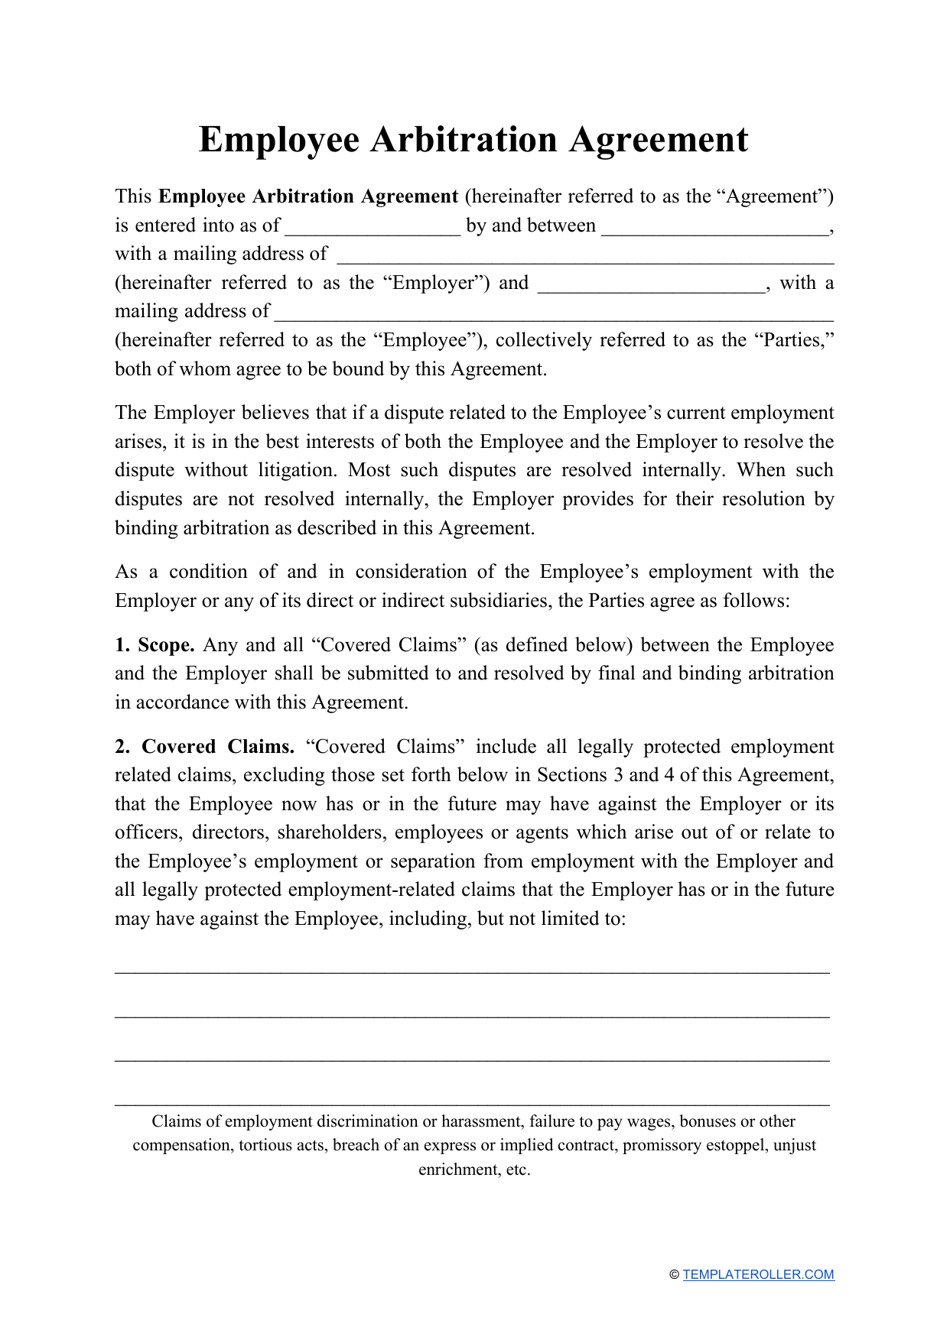 Employee Arbitration Agreement Template, Page 1